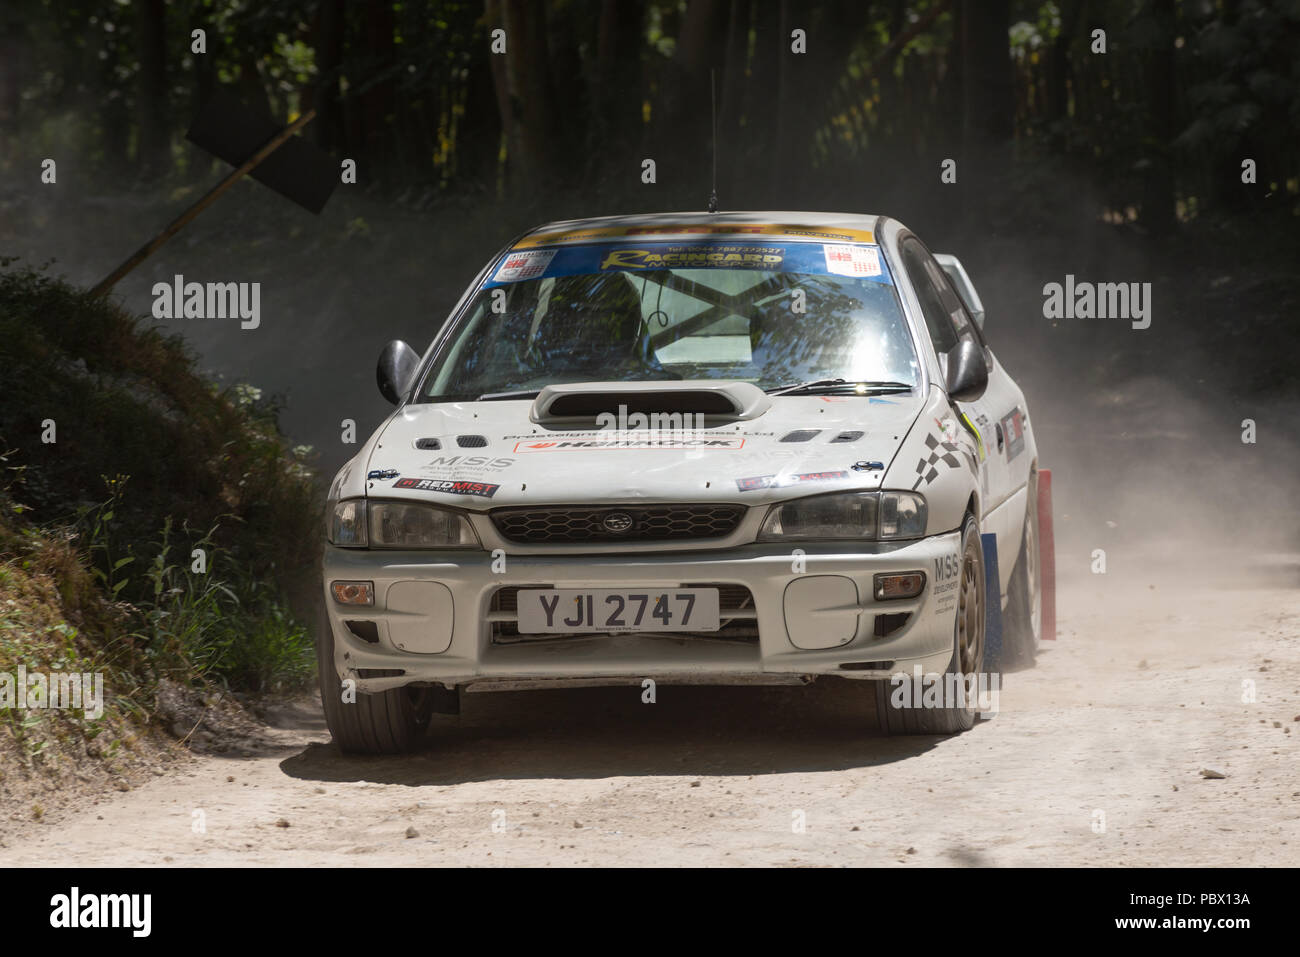 Subaru Impreza rally car on the forest stages at the Goodwood Festival of Speed 2018 Stock Photo